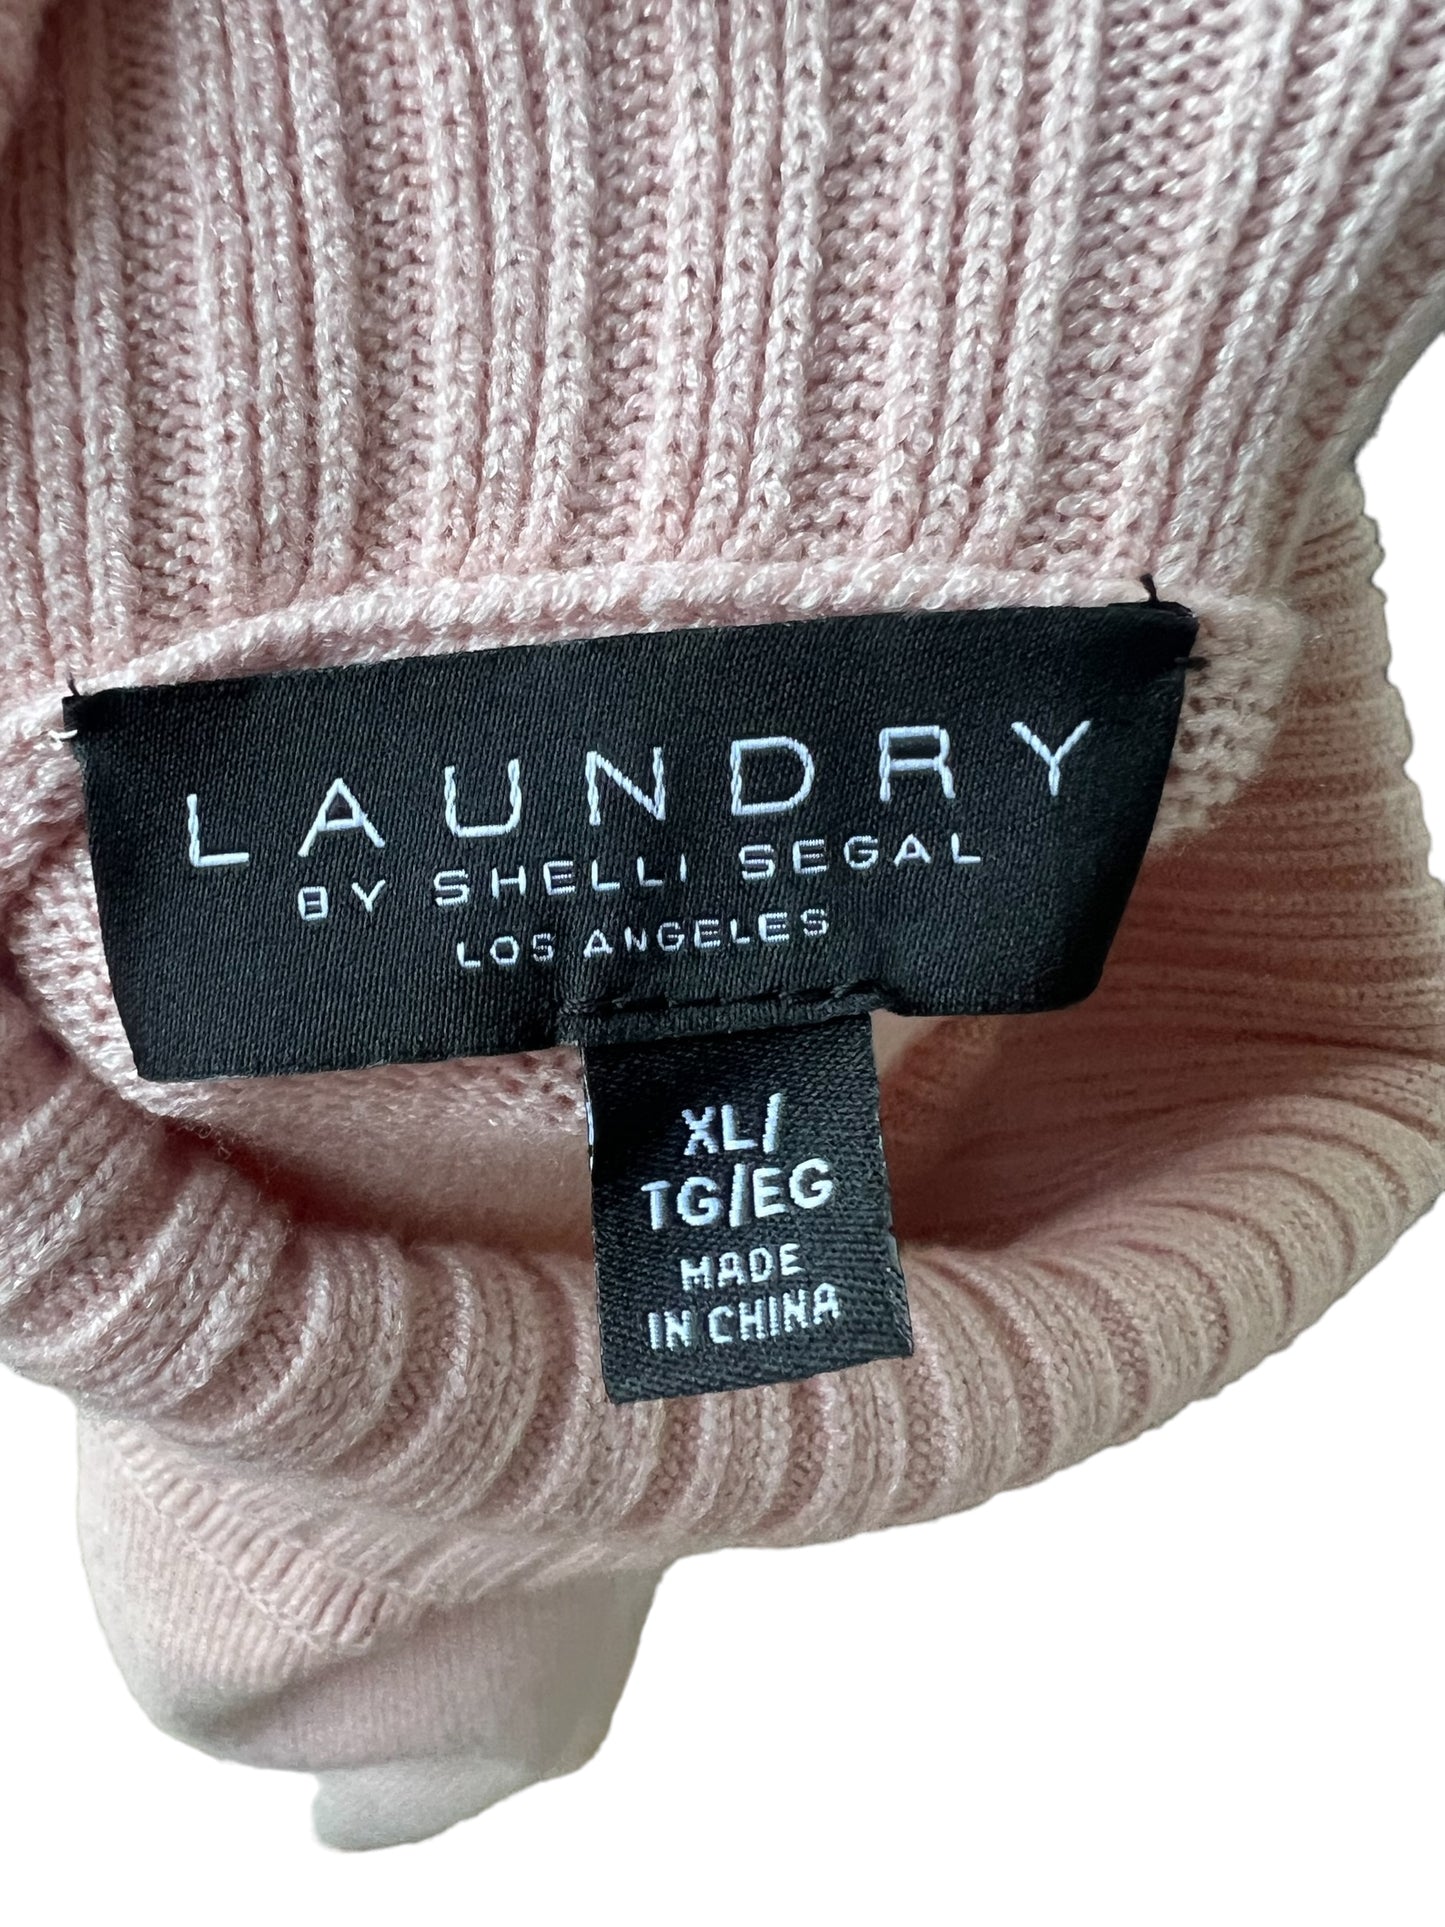 Laundry Pink Sweater